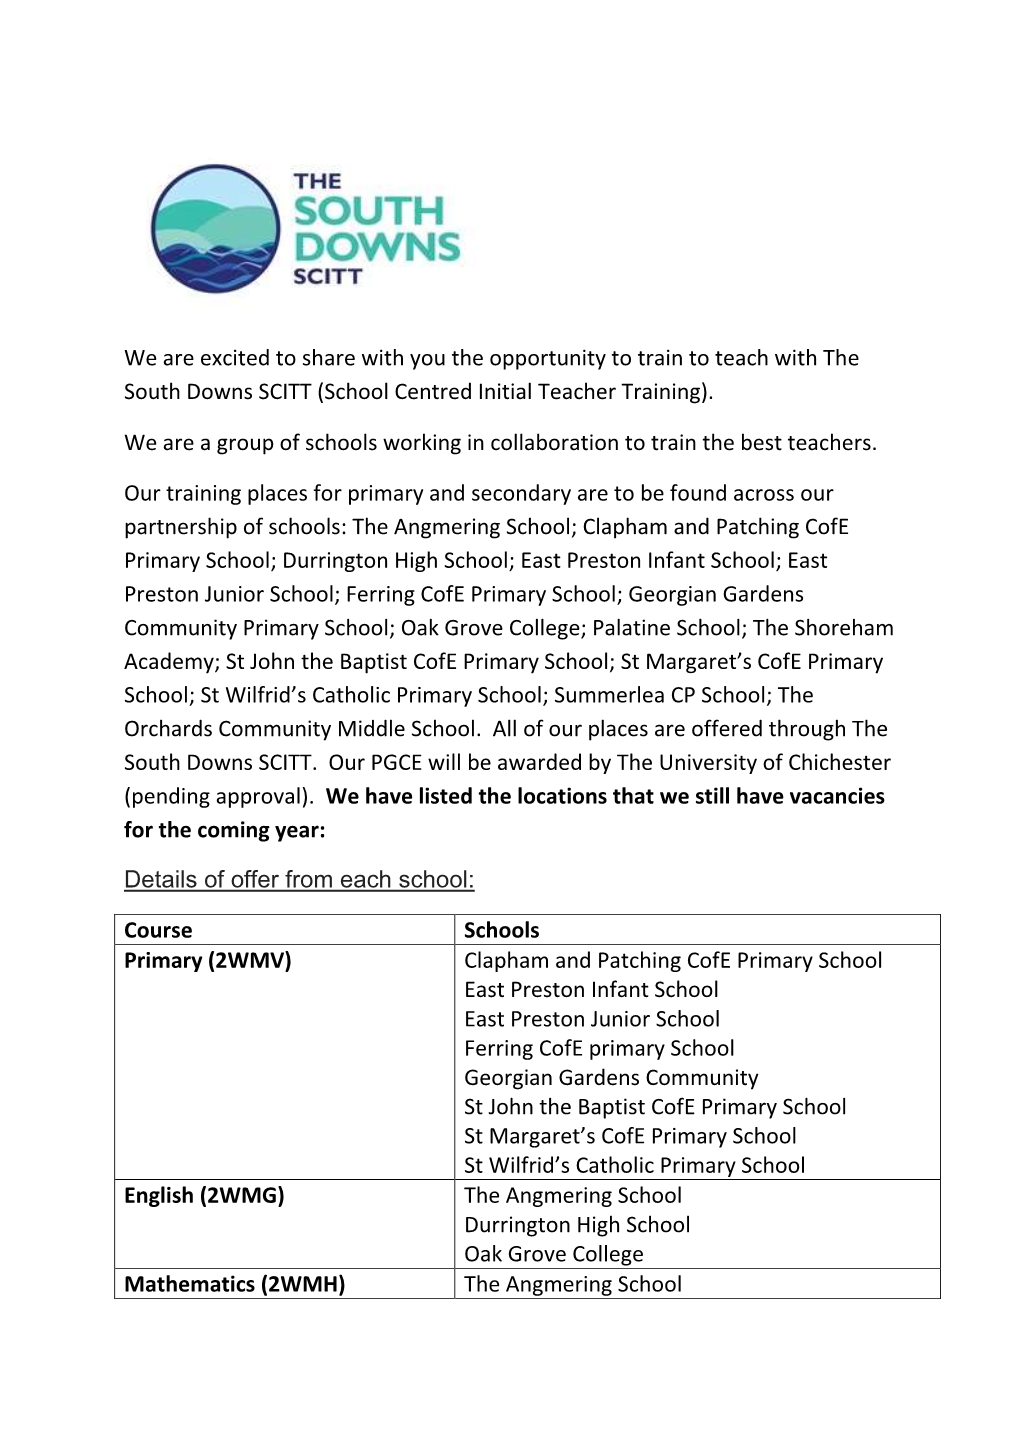 We Are Excited to Share with You the Opportunity to Train to Teach with the South Downs SCITT (School Centred Initial Teacher Training)